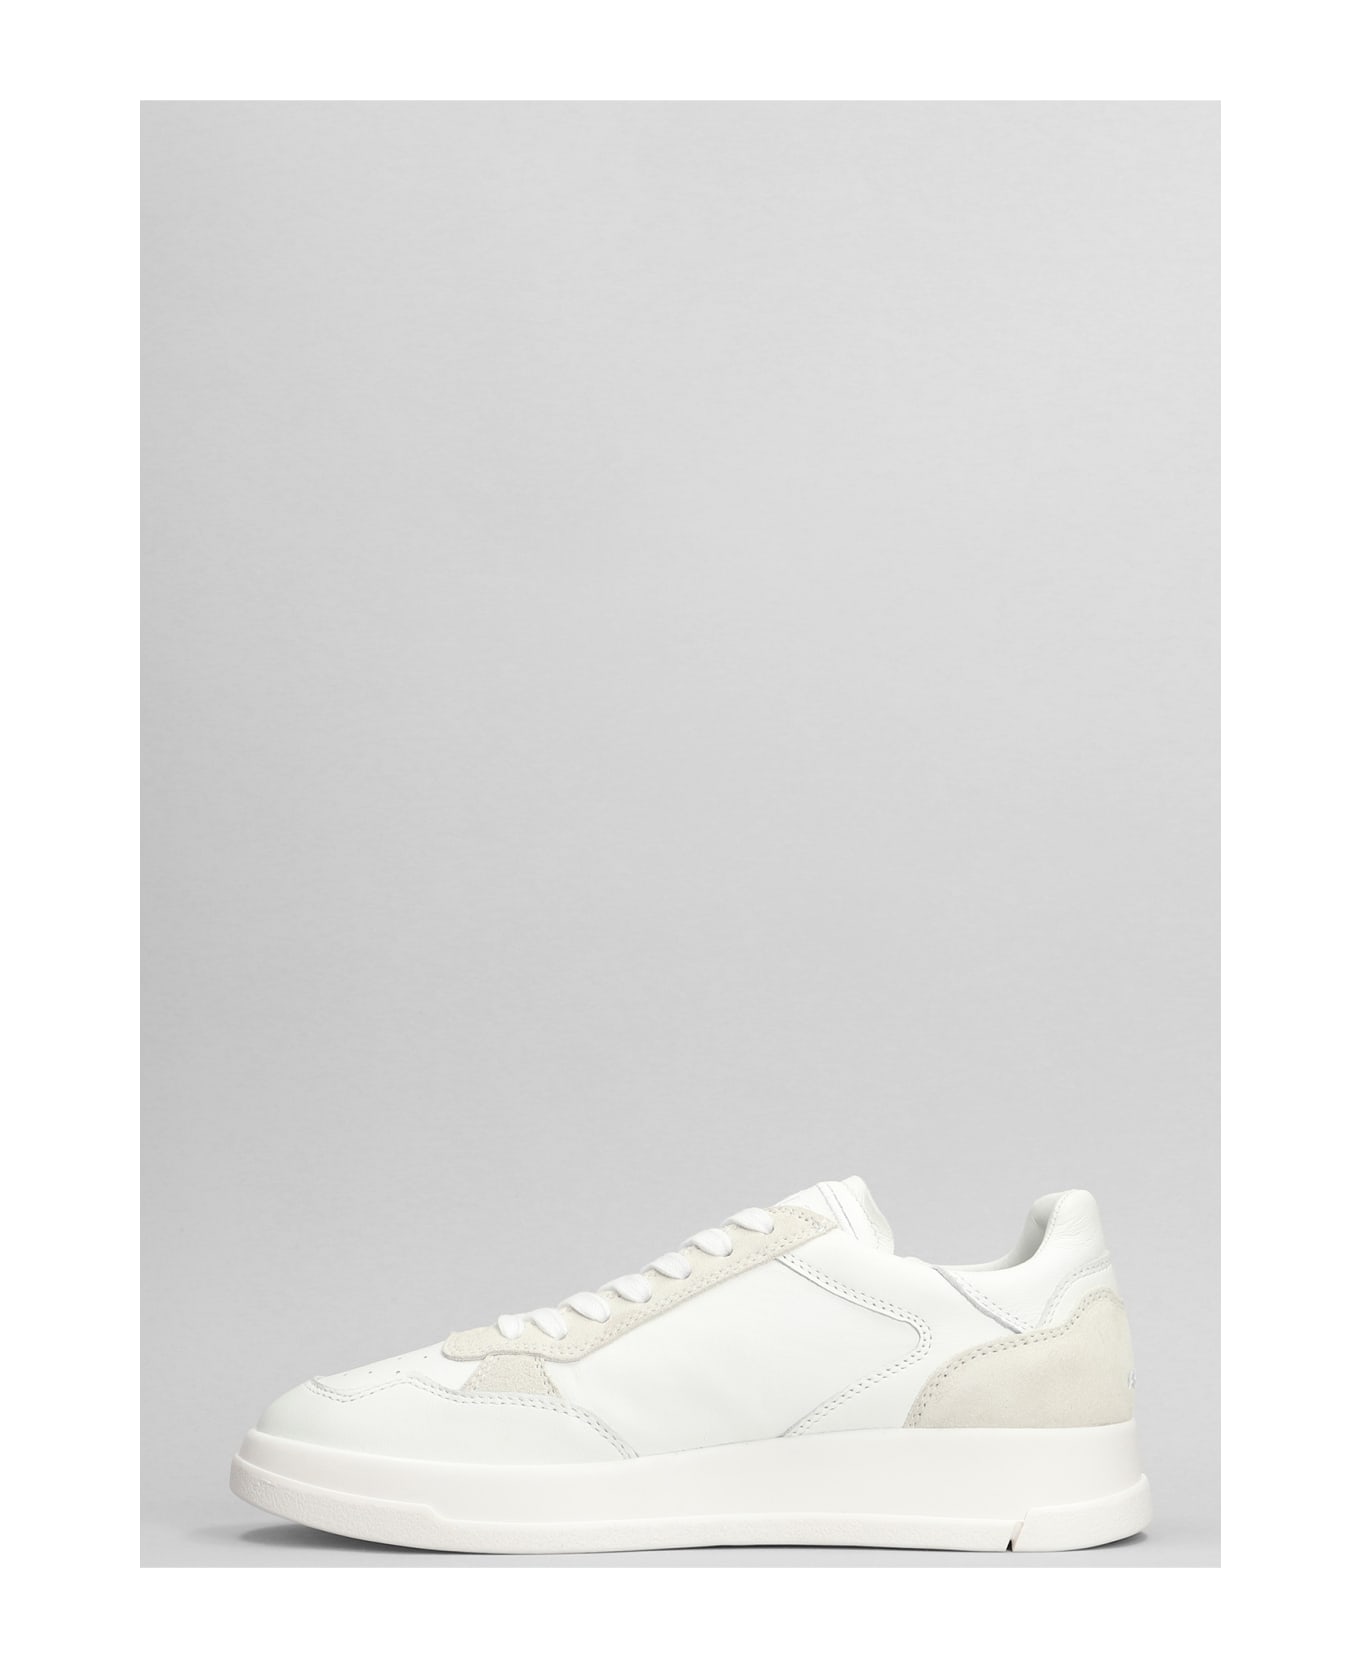 GHOUD Tweener Low Sneakers In White Suede And Leather - white